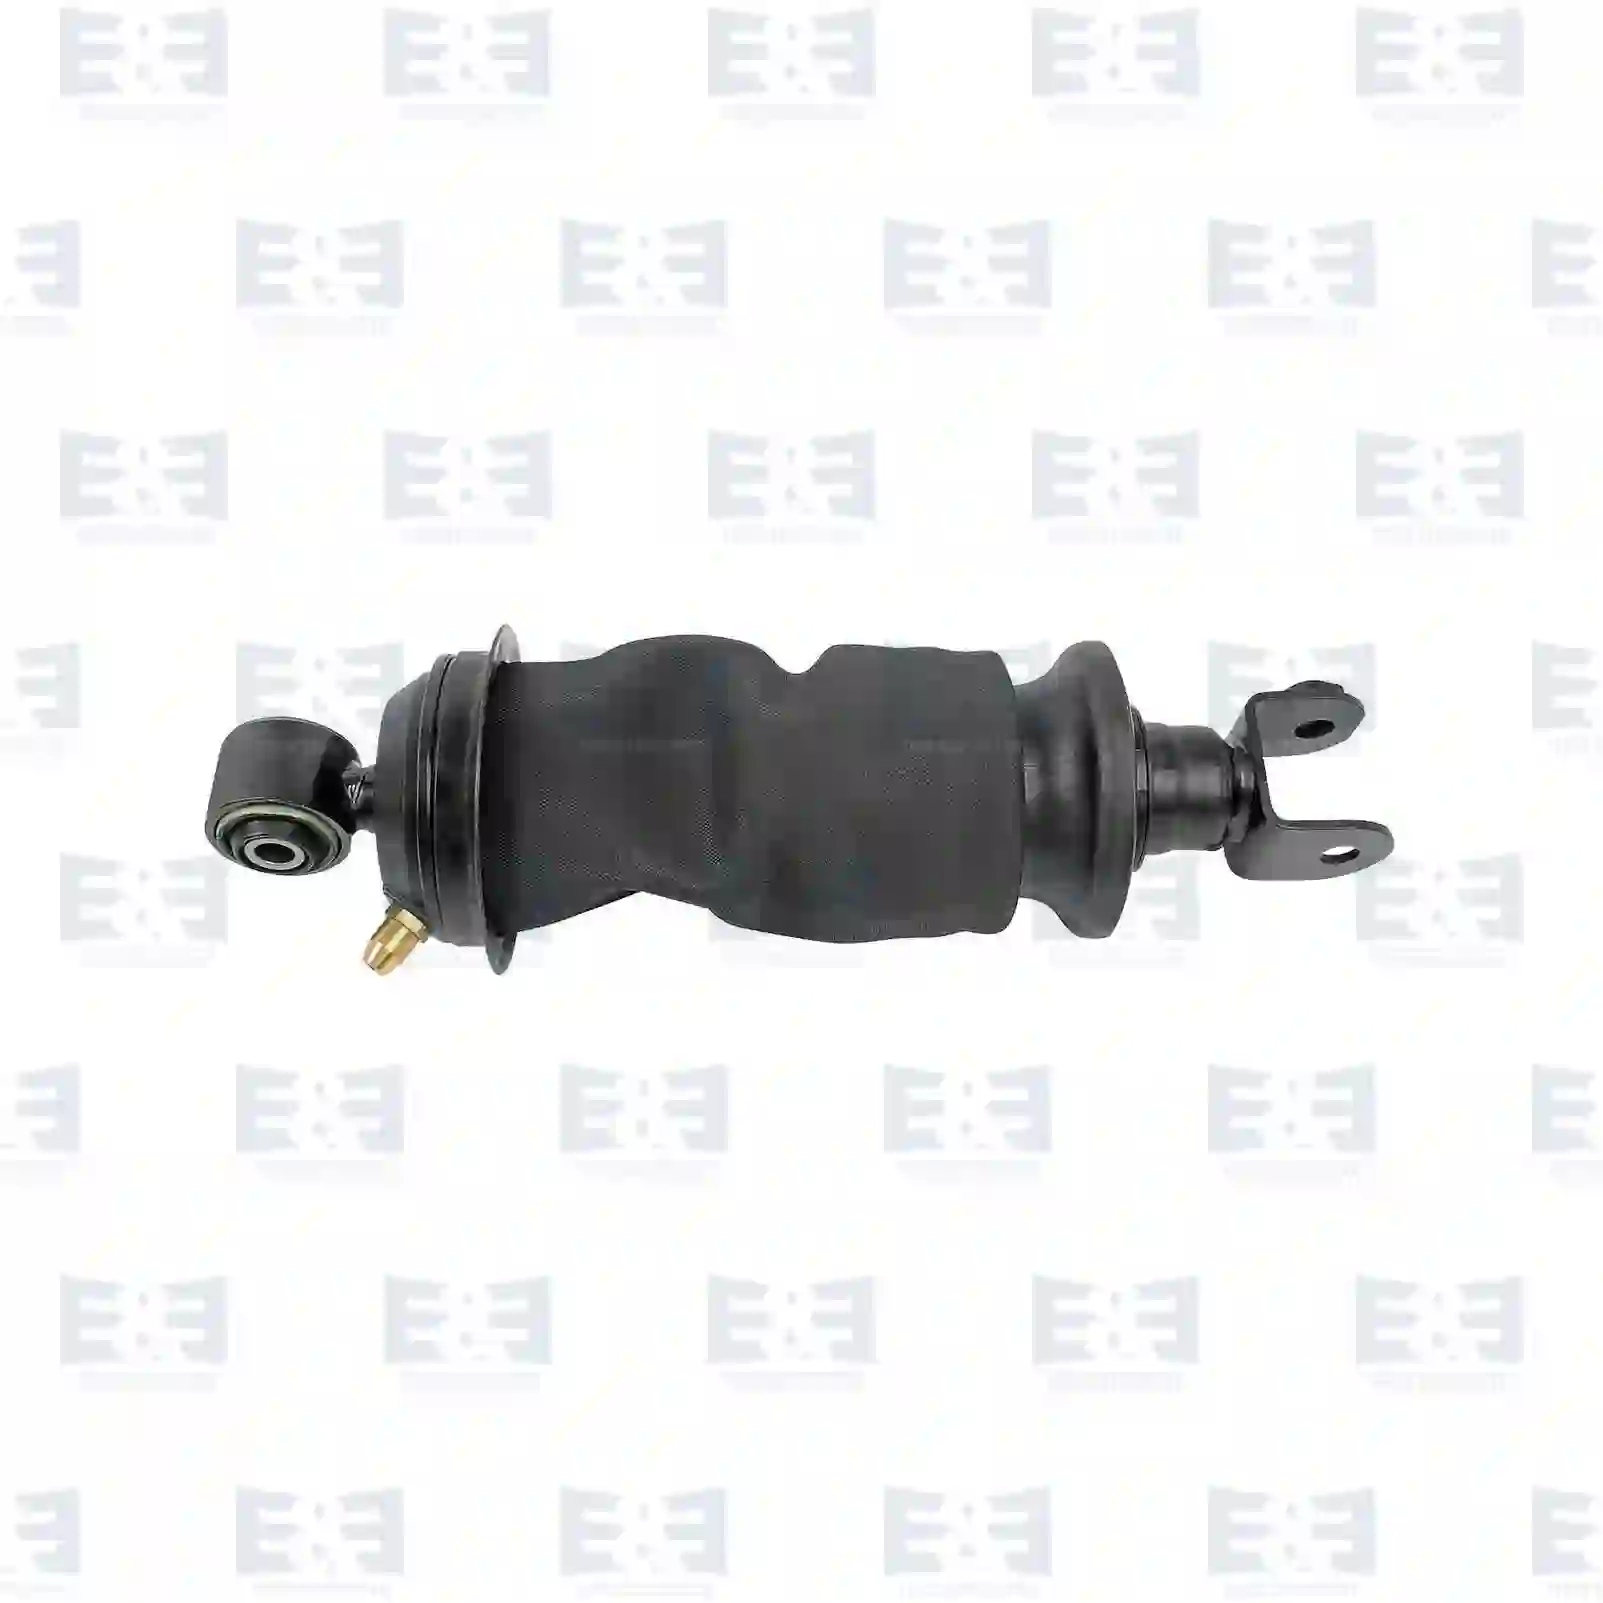 Cabin shock absorber, with air bellow, 2E2275776, 1908097, 2493165, , , , ||  2E2275776 E&E Truck Spare Parts | Truck Spare Parts, Auotomotive Spare Parts Cabin shock absorber, with air bellow, 2E2275776, 1908097, 2493165, , , , ||  2E2275776 E&E Truck Spare Parts | Truck Spare Parts, Auotomotive Spare Parts